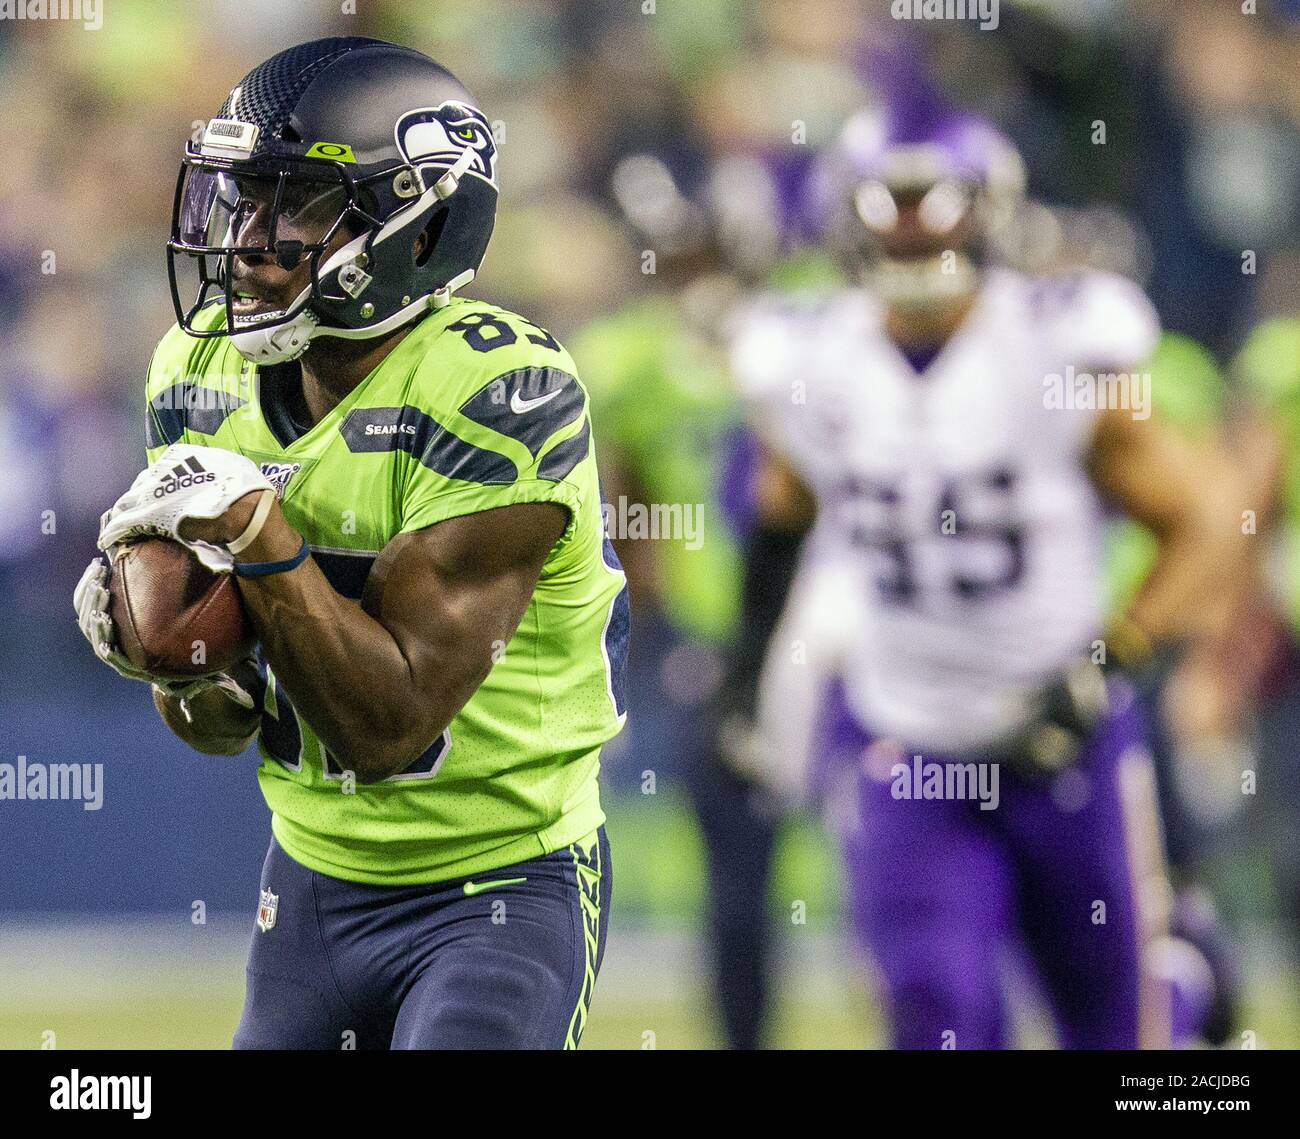 Seattle, United States. 02nd Dec, 2019. Seattle Seahawks wide receiver David Moore (83) catches a 60 yard touchdown pass from Russell Wilson during the third quarter against the Minnesota Vikings at CenturyLink Field in a Monday Night Football game on December 2, 2019 in Seattle, Washington. The Seahawks beat the Vikings 37-30. Photo by Jim Bryant/UPI Credit: UPI/Alamy Live News Stock Photo